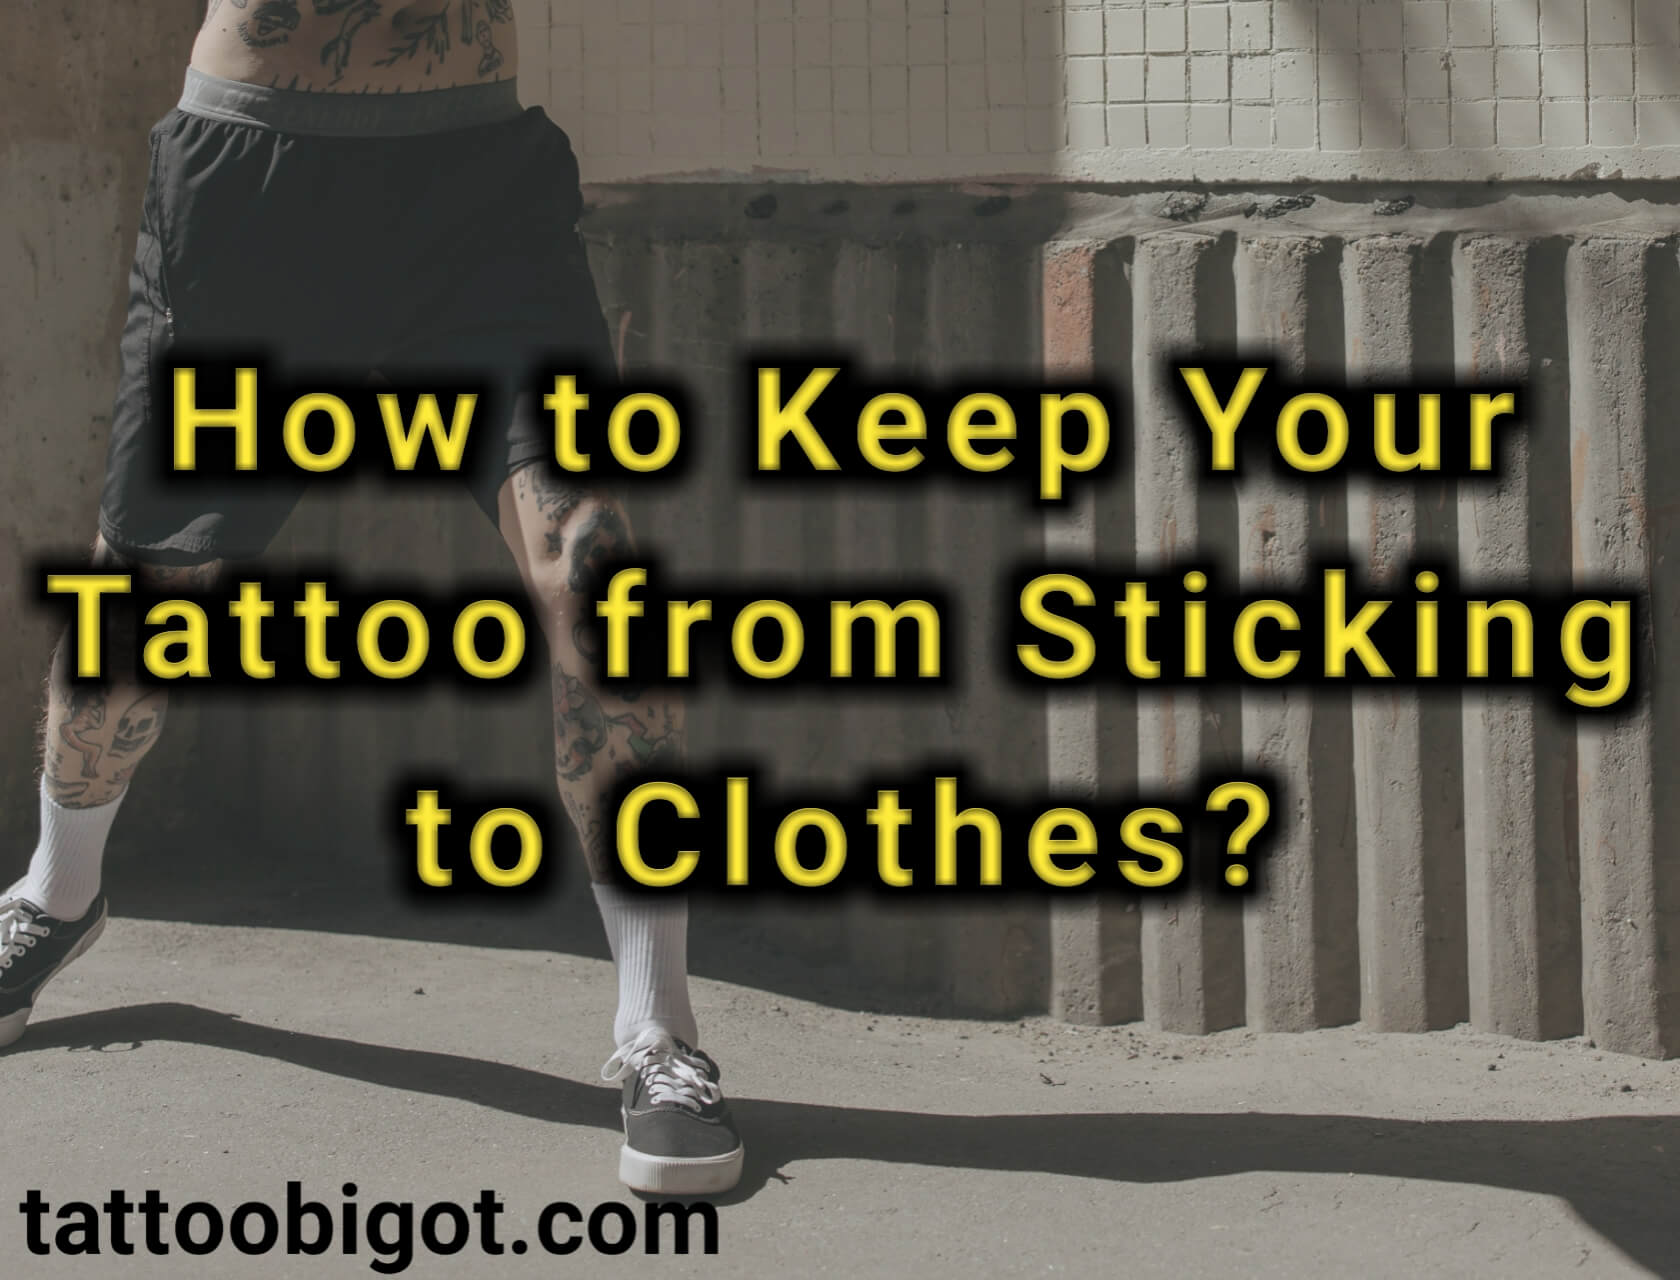 How to Keep Your Tattoo from Sticking to Clothes